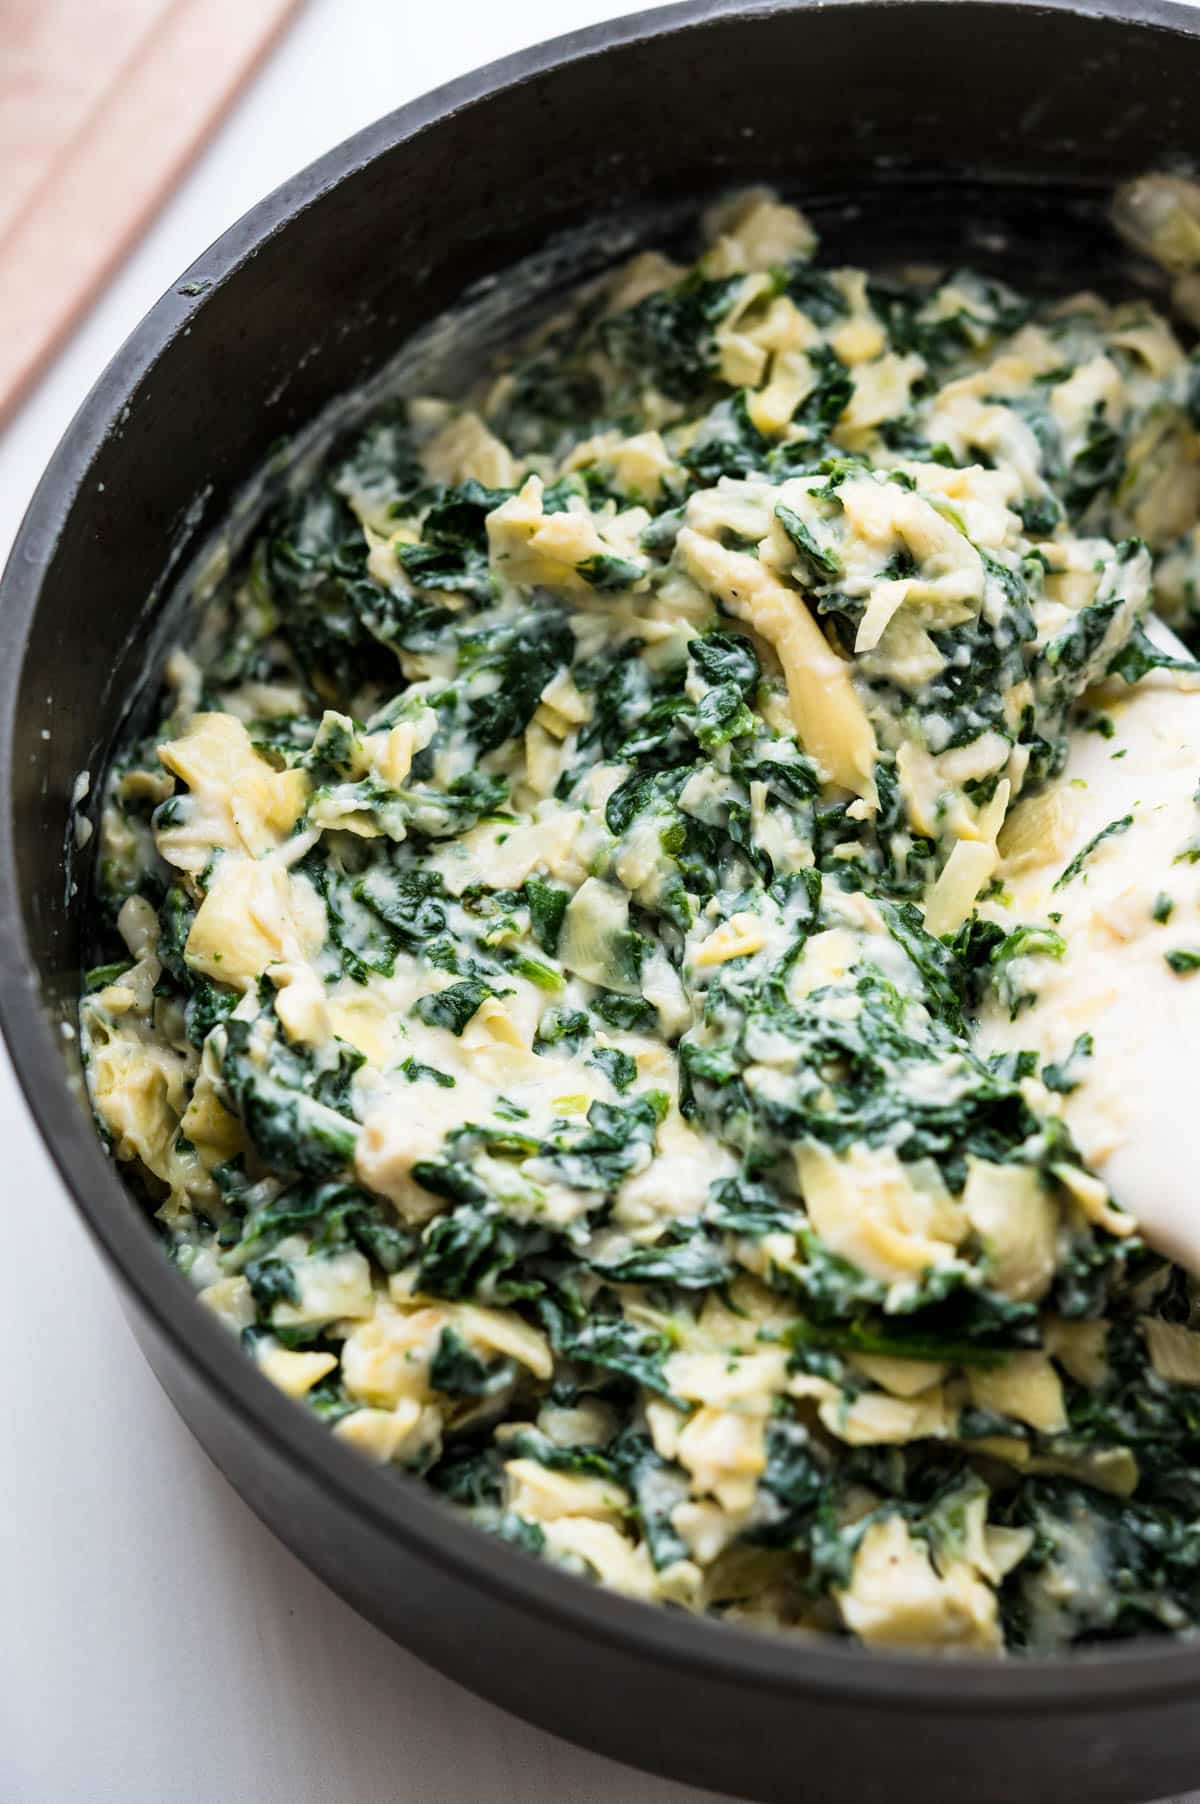 mixing the spinach artichoke dip recipe in the skillet.